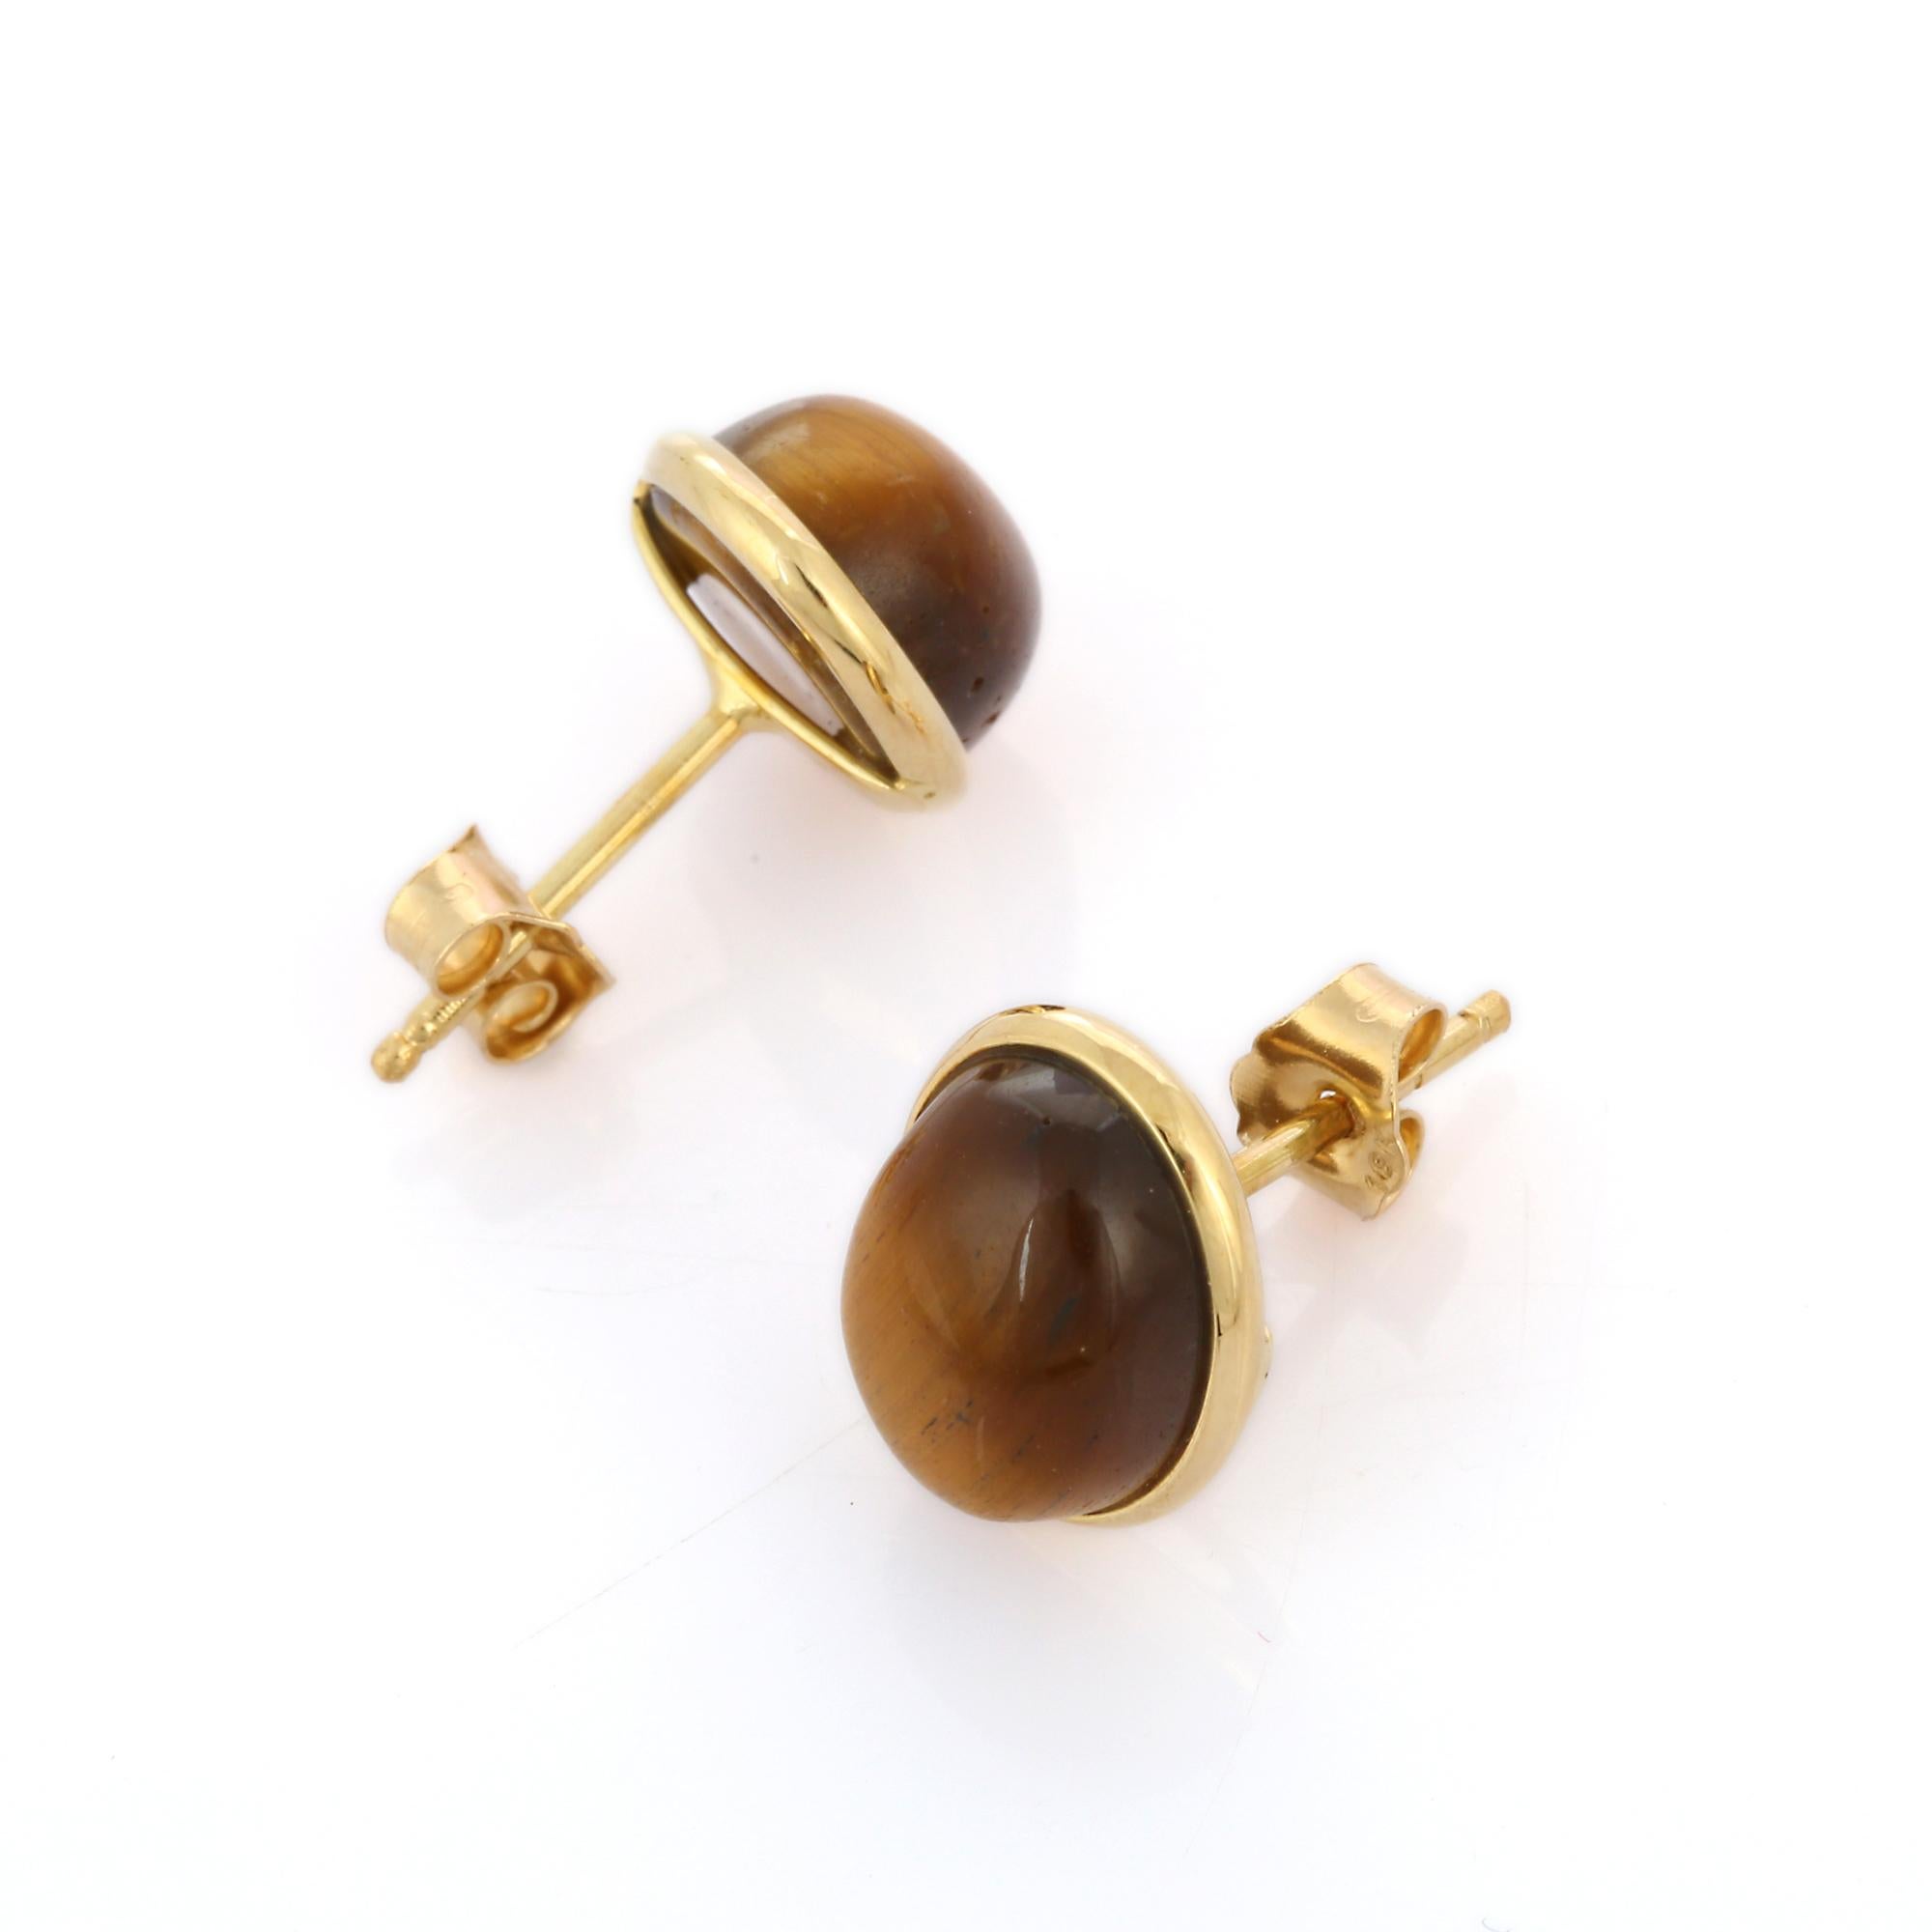 Genuine Tiger's Eye Oval Cut Stud Earrings Made in 18K Yellow Gold In New Condition For Sale In Houston, TX